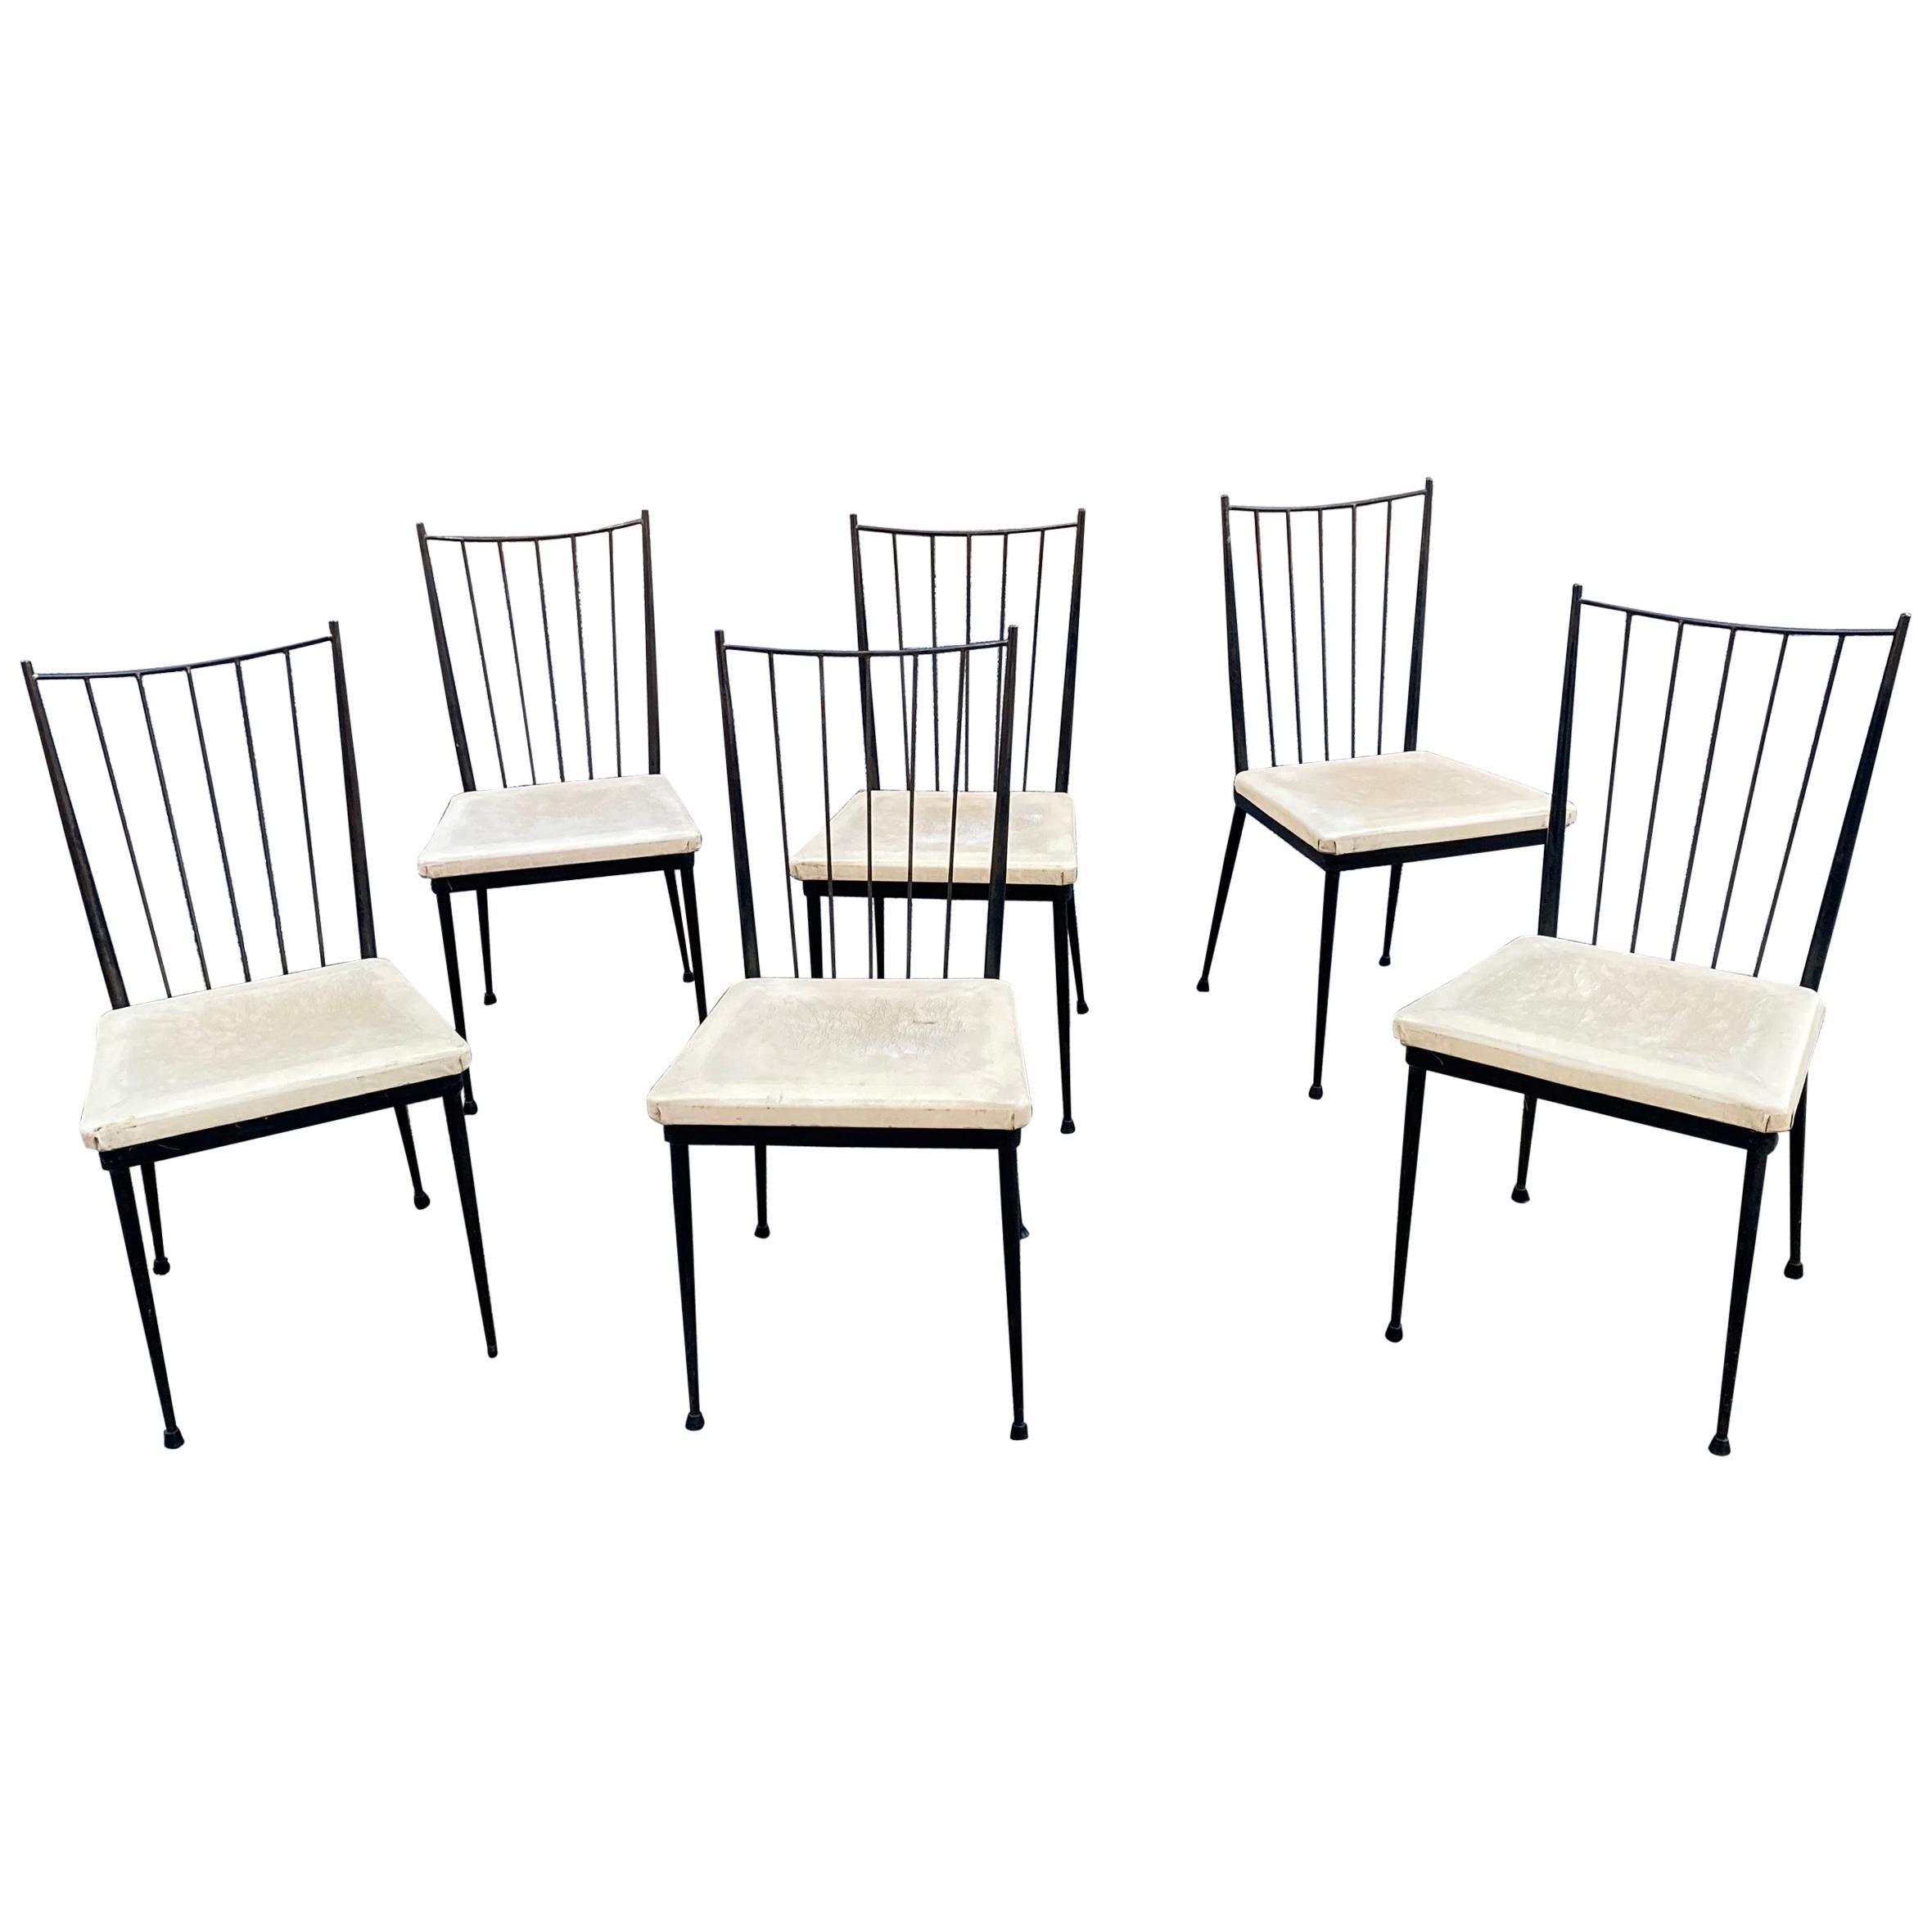 6 chairs in lacquered metal, french reconstruction circa 1950/1960